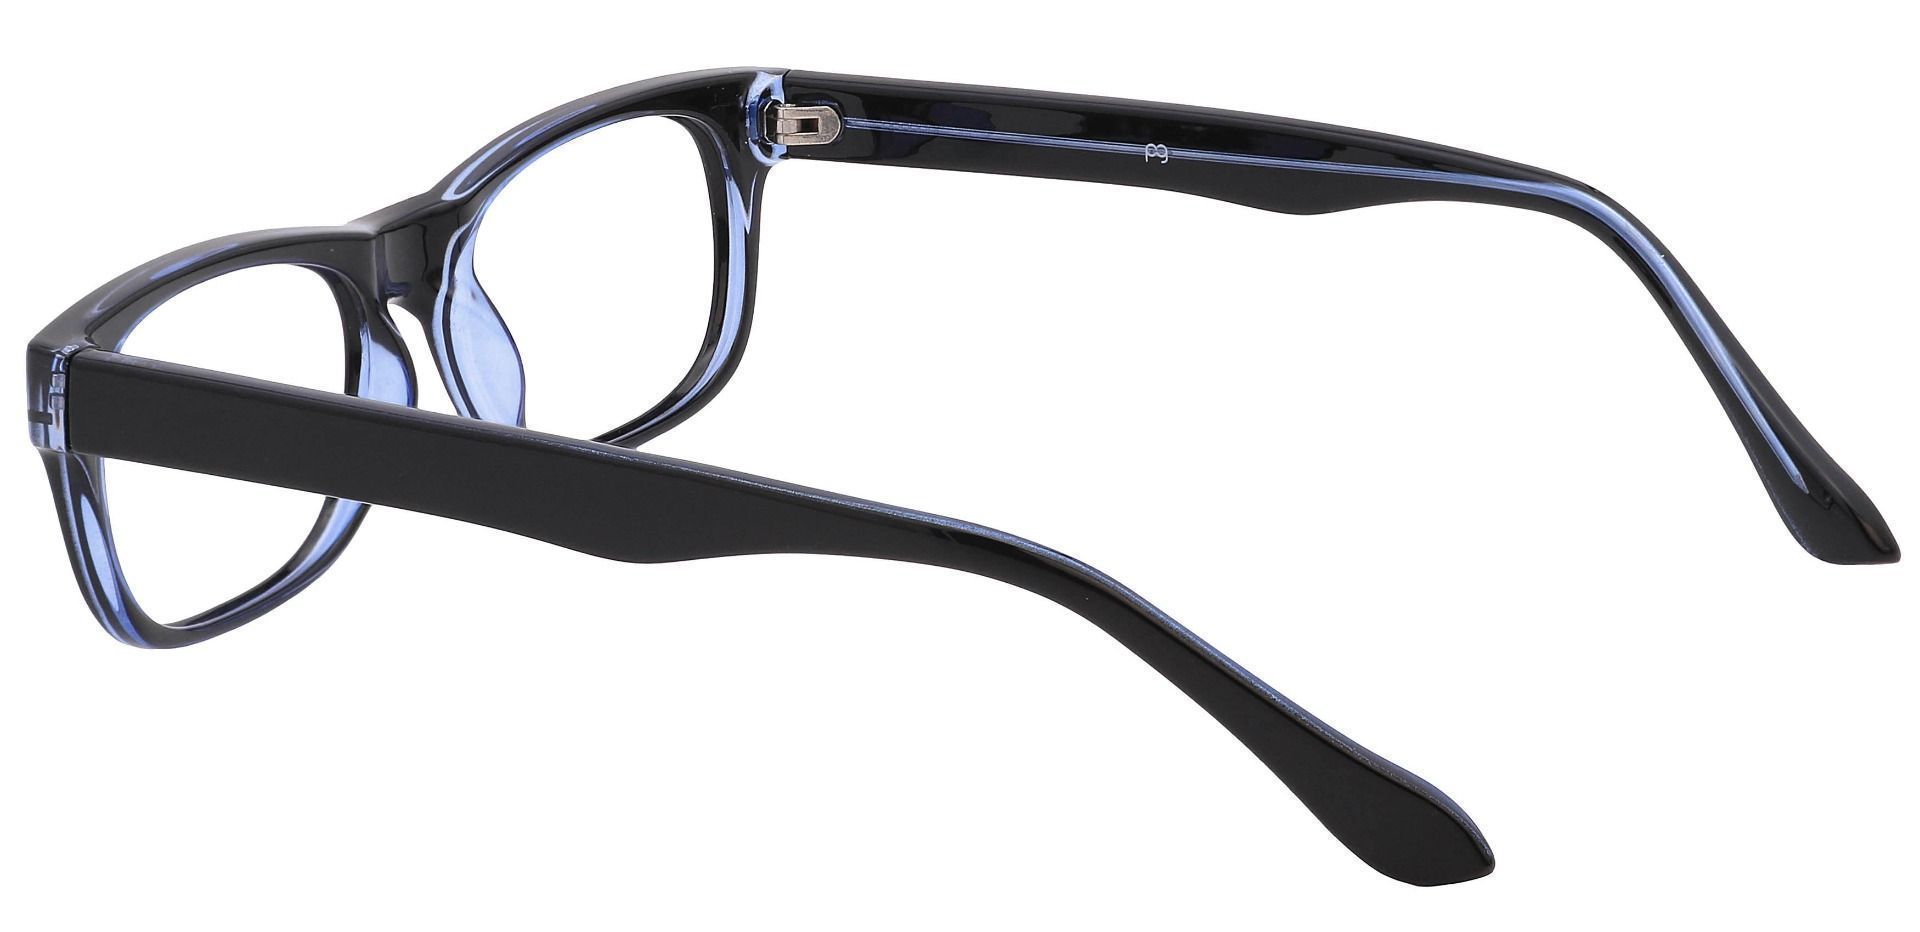 Murphy Rectangle Eyeglasses Frame - The Frame Is Blue And Black